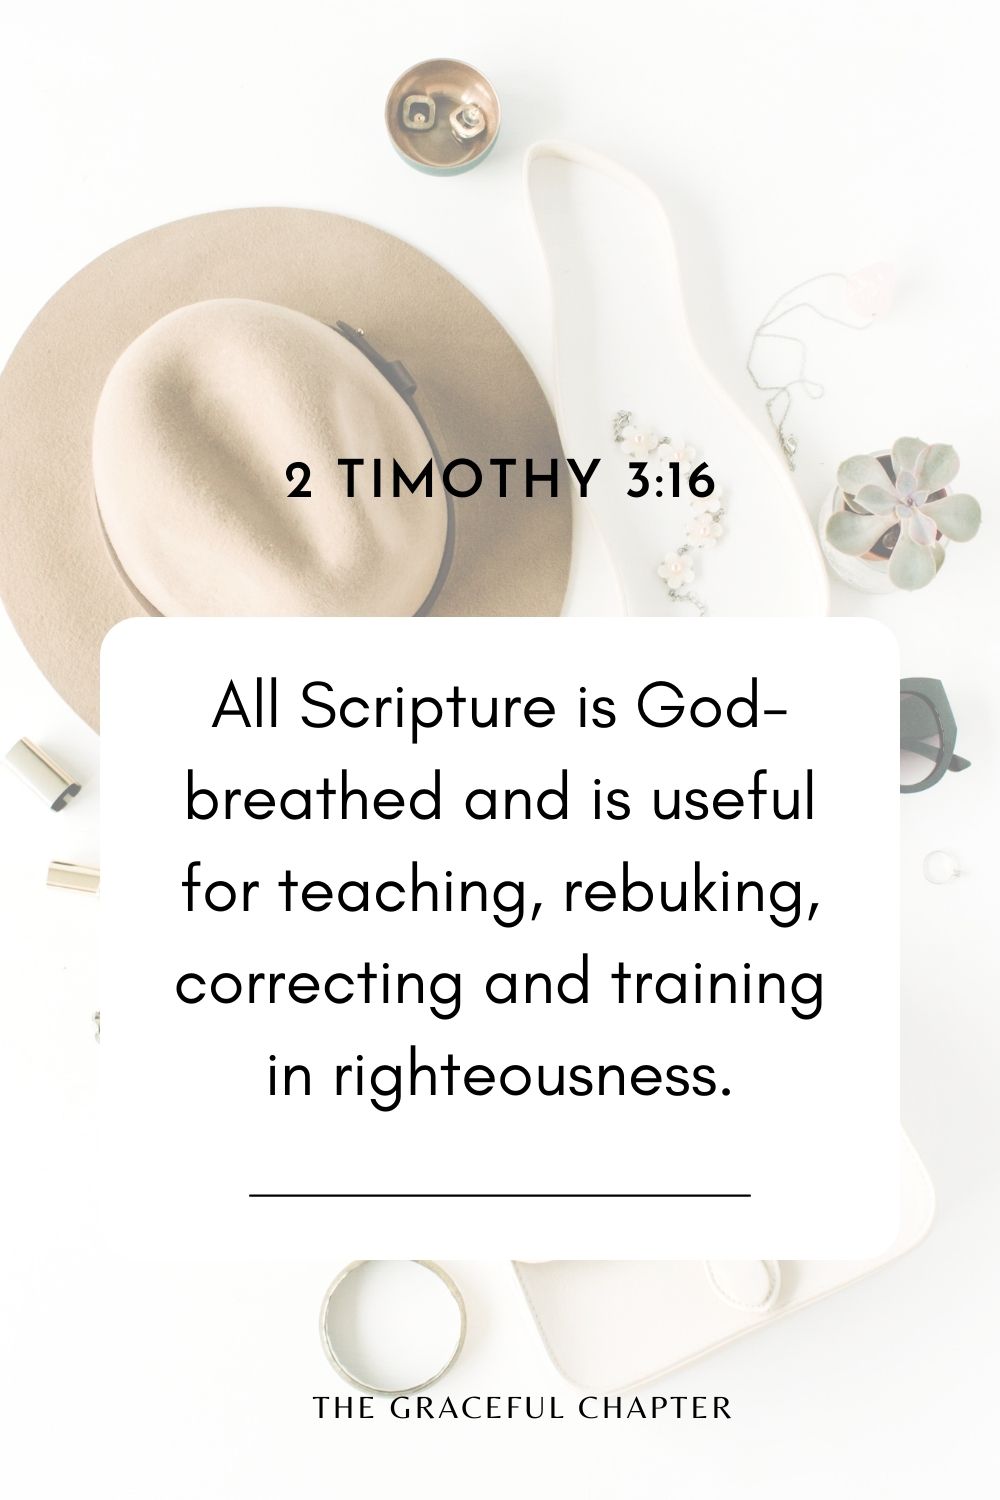 All Scripture is God-breathed and is useful for teaching, rebuking, correcting and training in righteousness. 2 Timothy 3:16